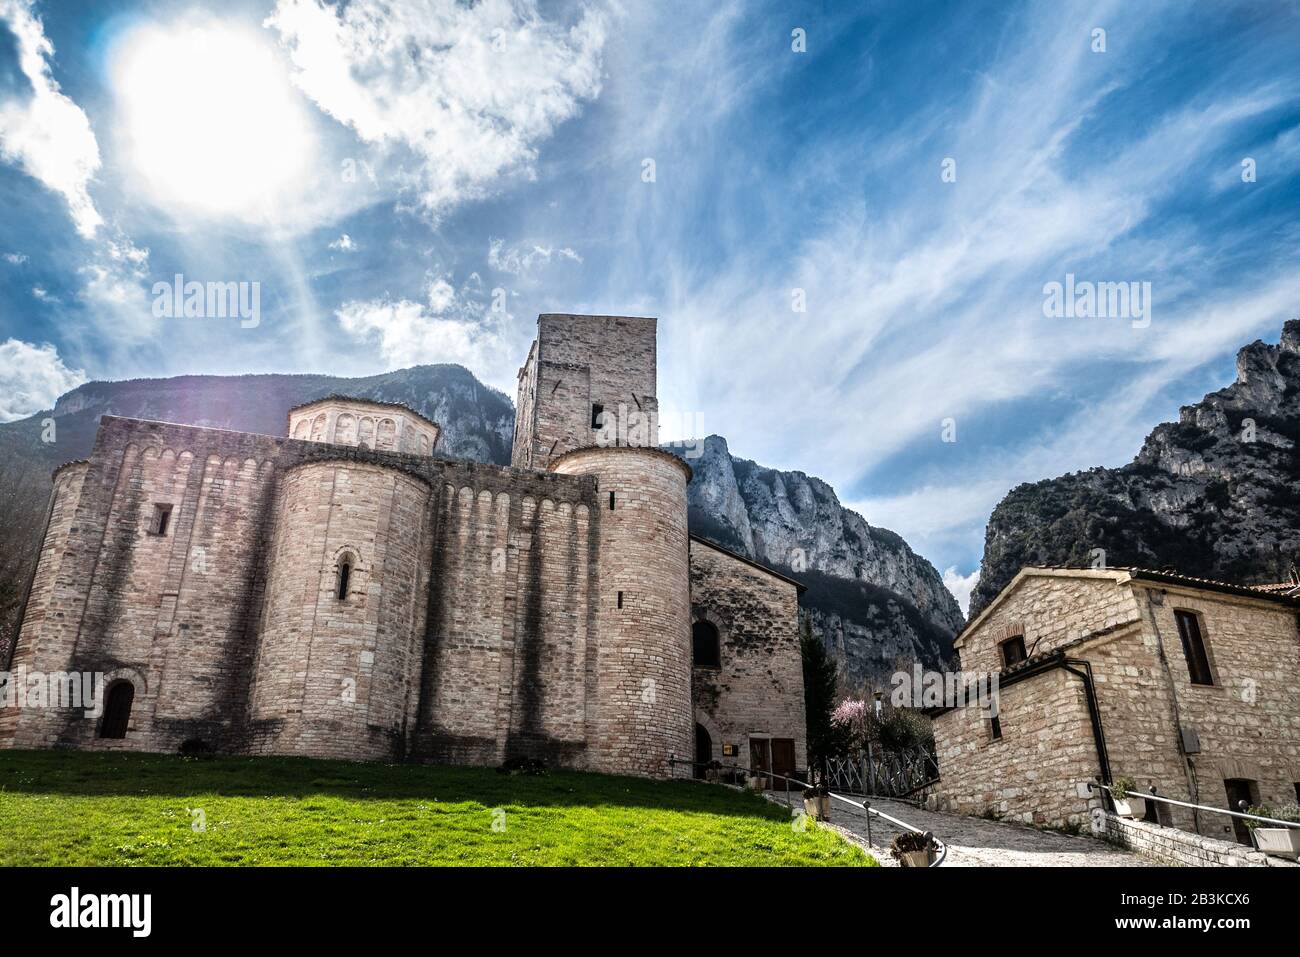 Italy, Marche, Genga, Romanesque abbey of San Vittore in the Monti Sibillini National Park Stock Photo